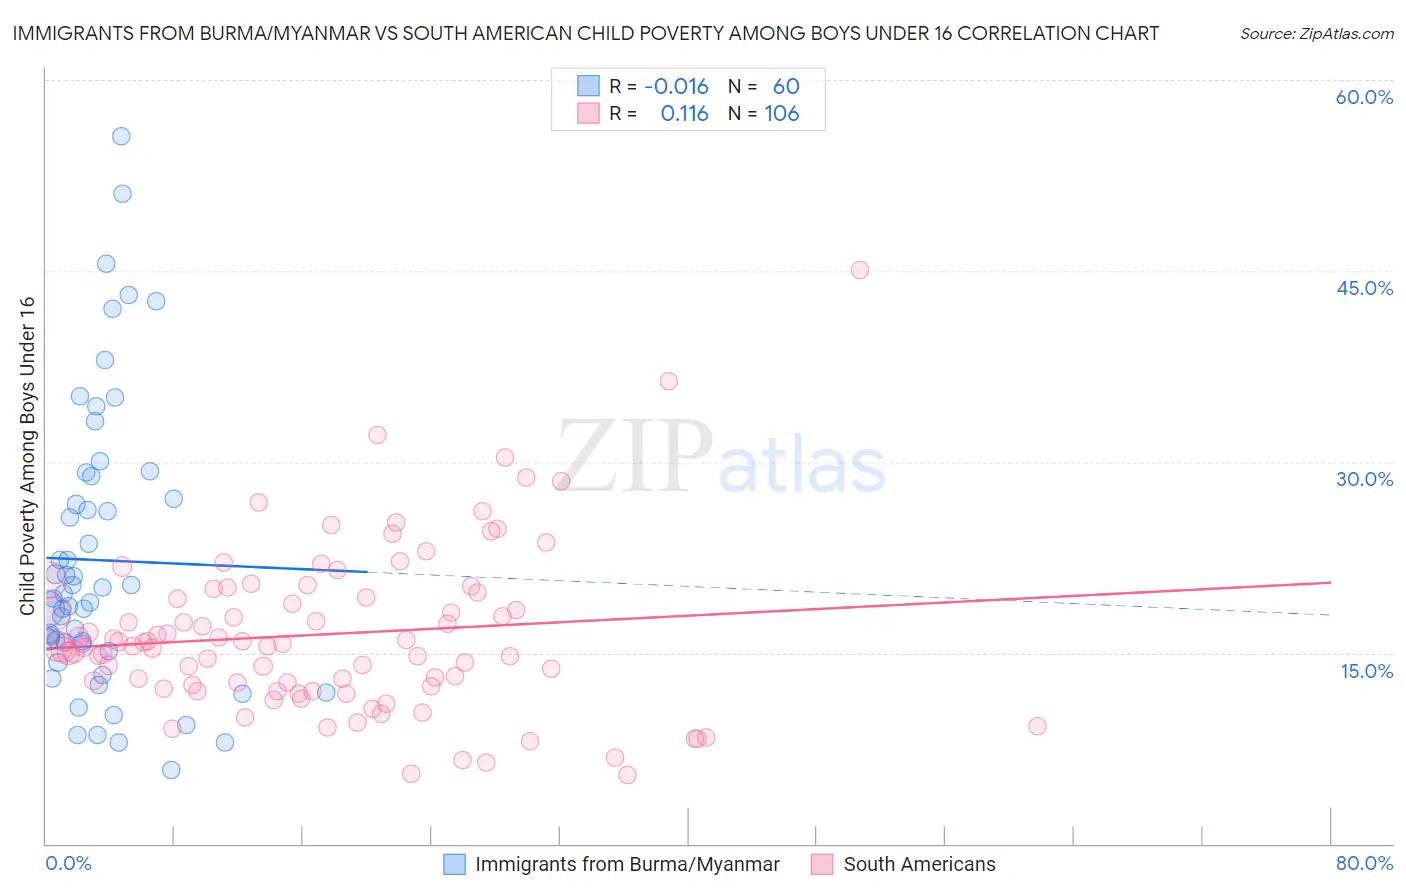 Immigrants from Burma/Myanmar vs South American Child Poverty Among Boys Under 16